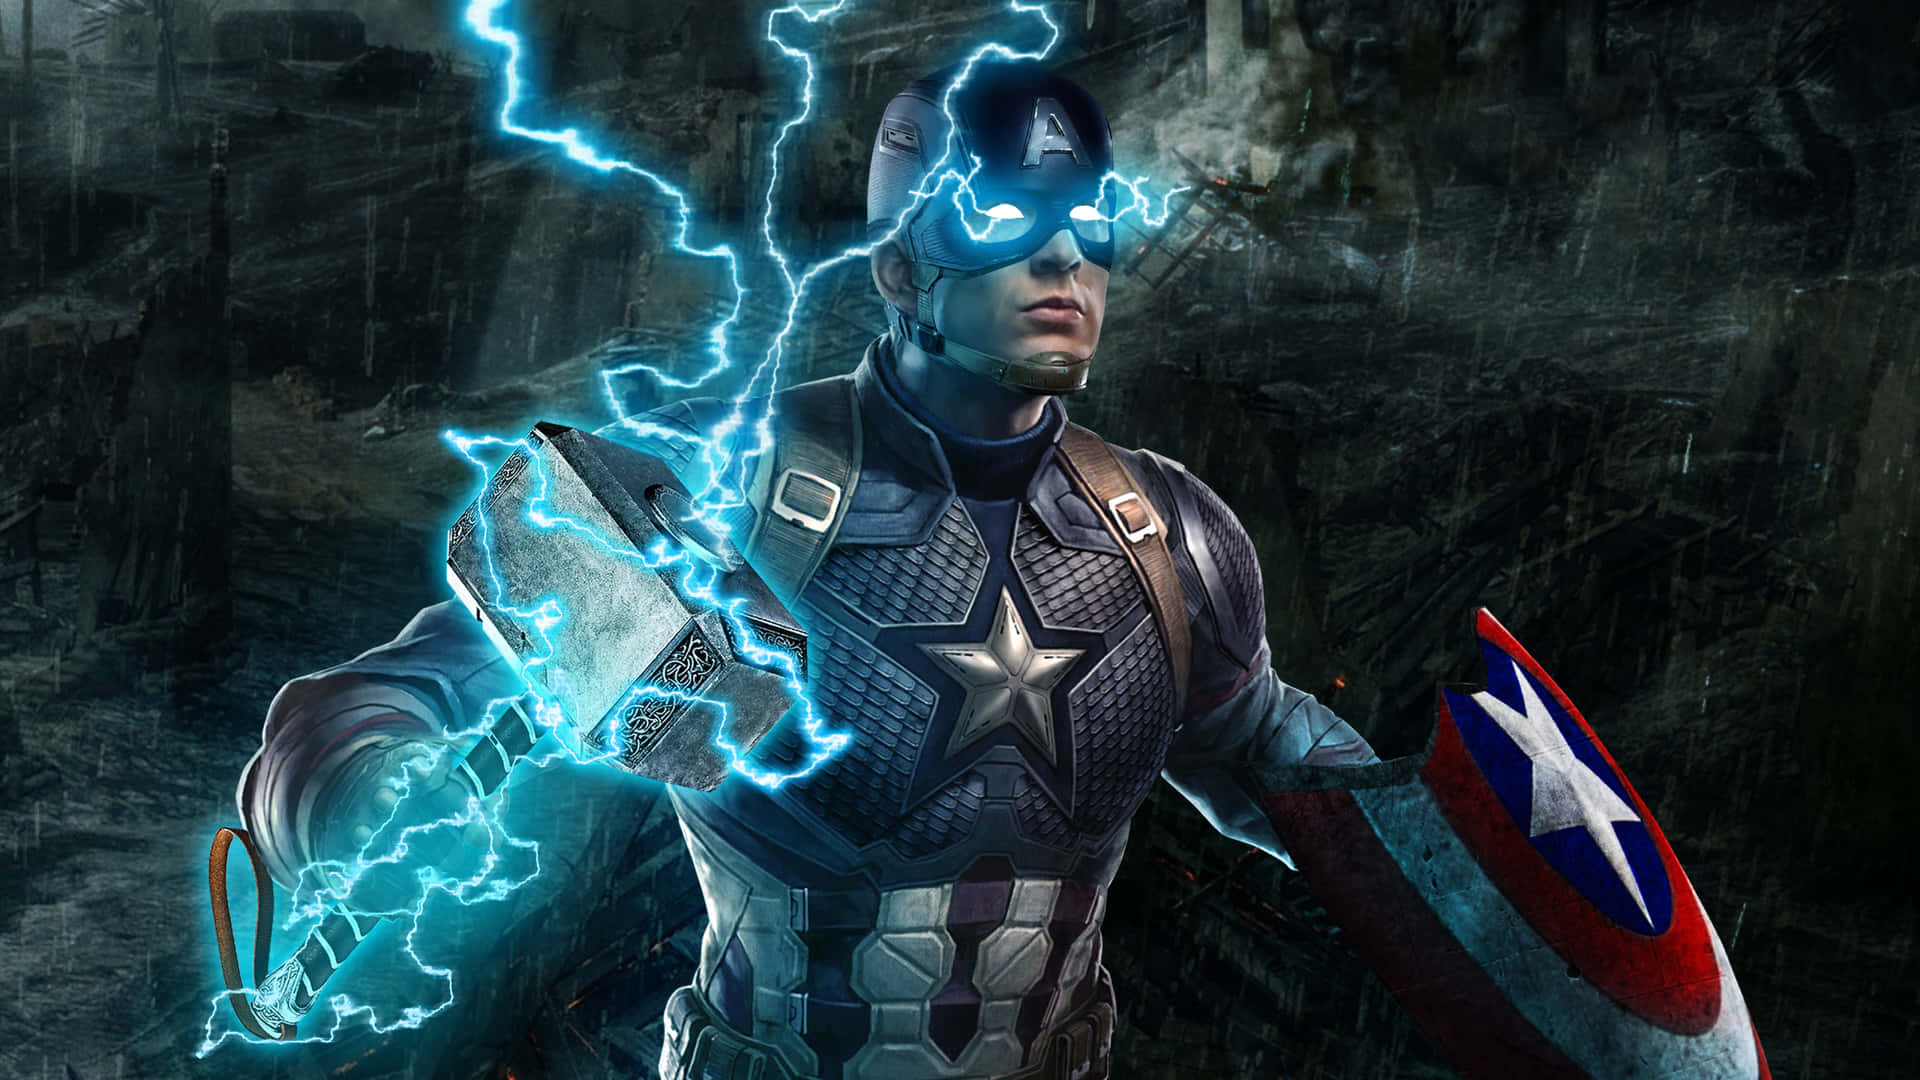 Join Captain America and Fight for Justice Wallpaper